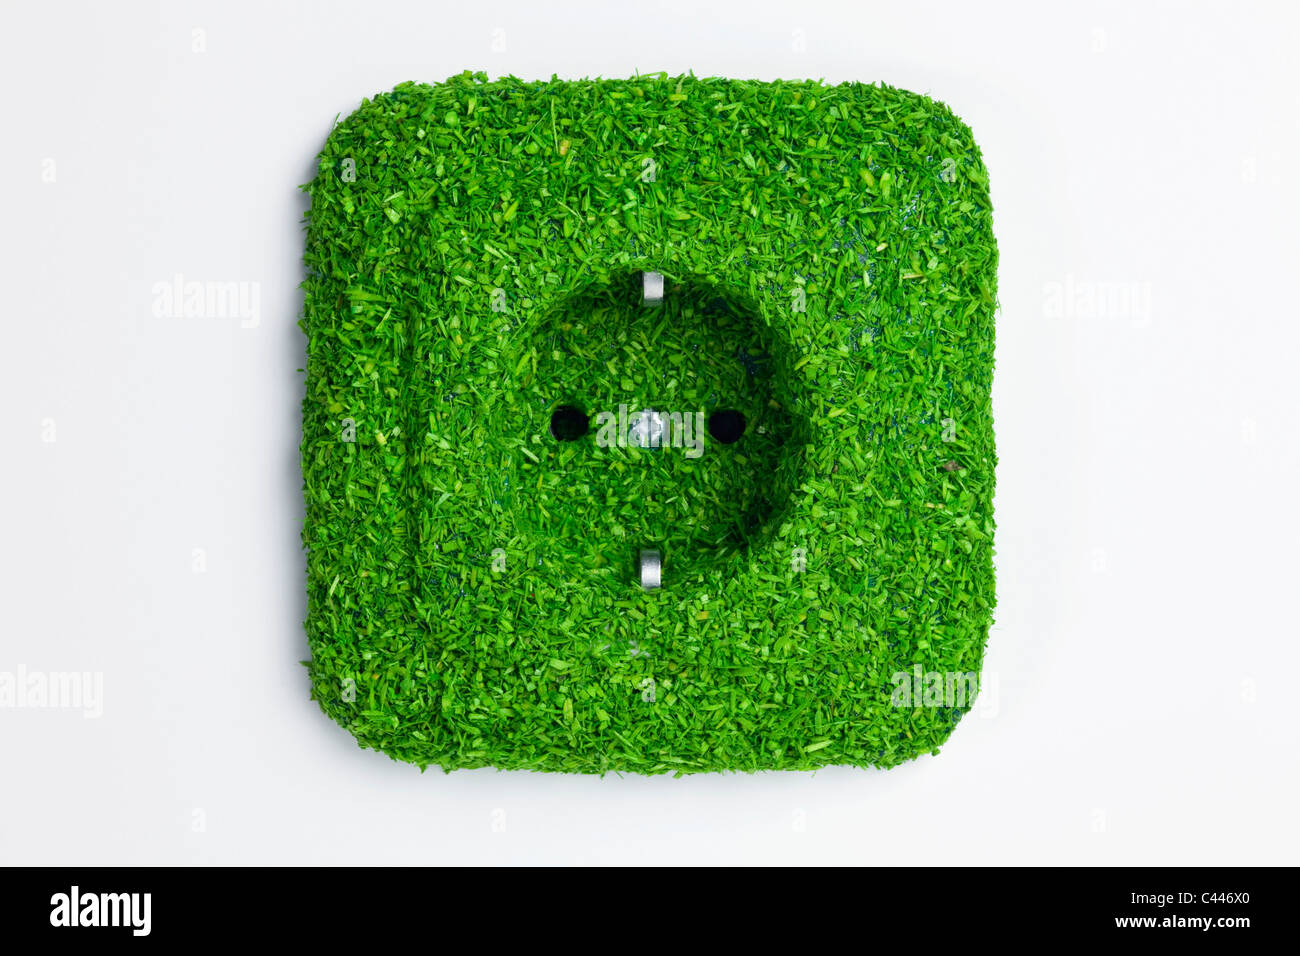 Energy saving electrical wall outlet covered in green grass Stock Photo